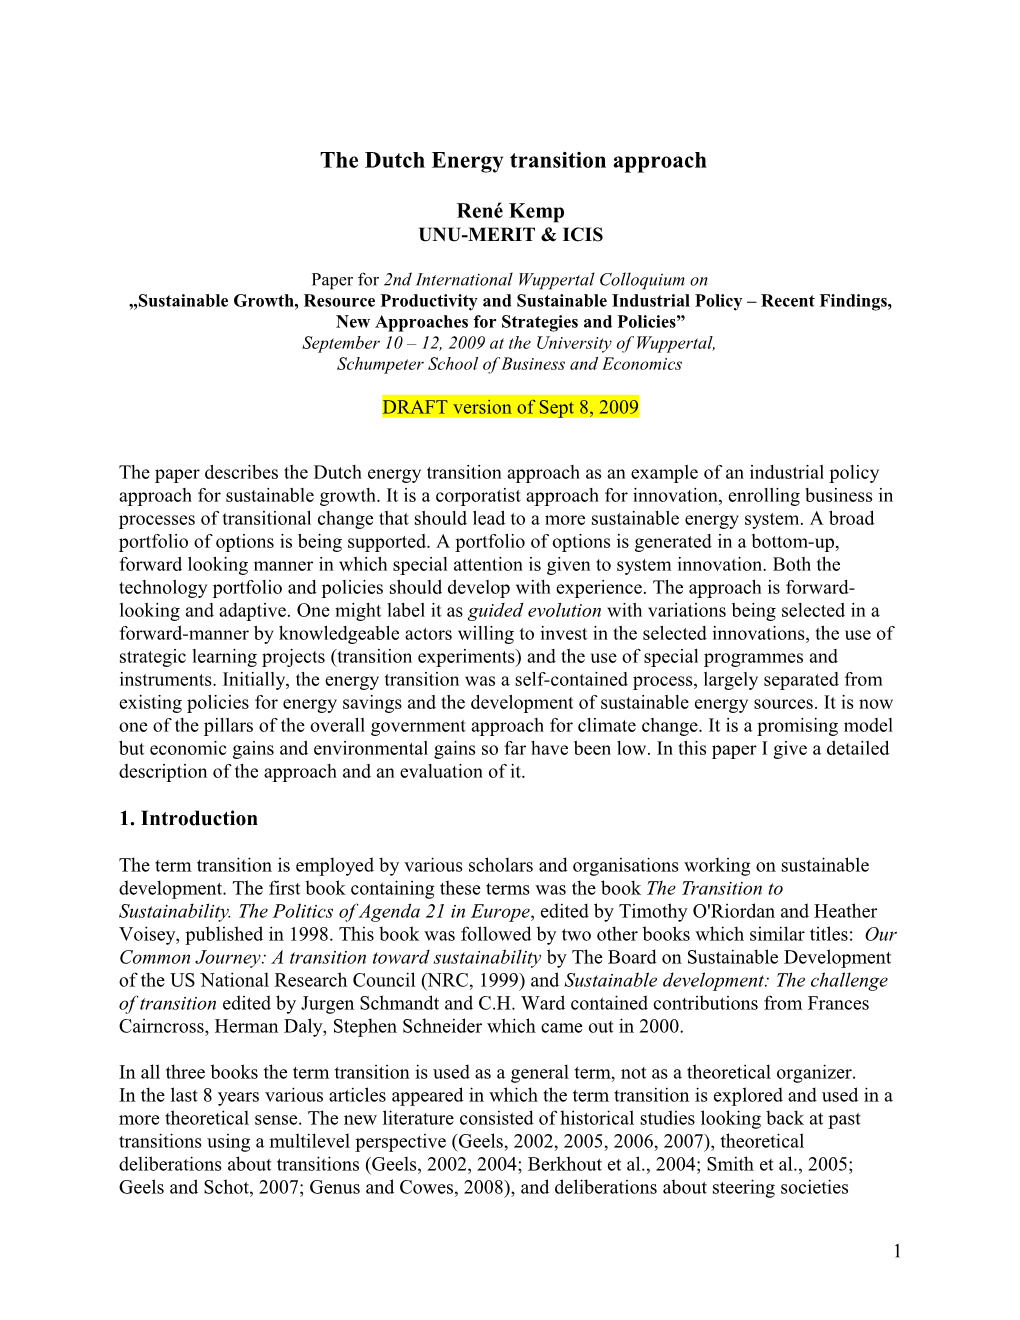 Abstract of Paper the Dutch Energy Transition Approach by René Kemp